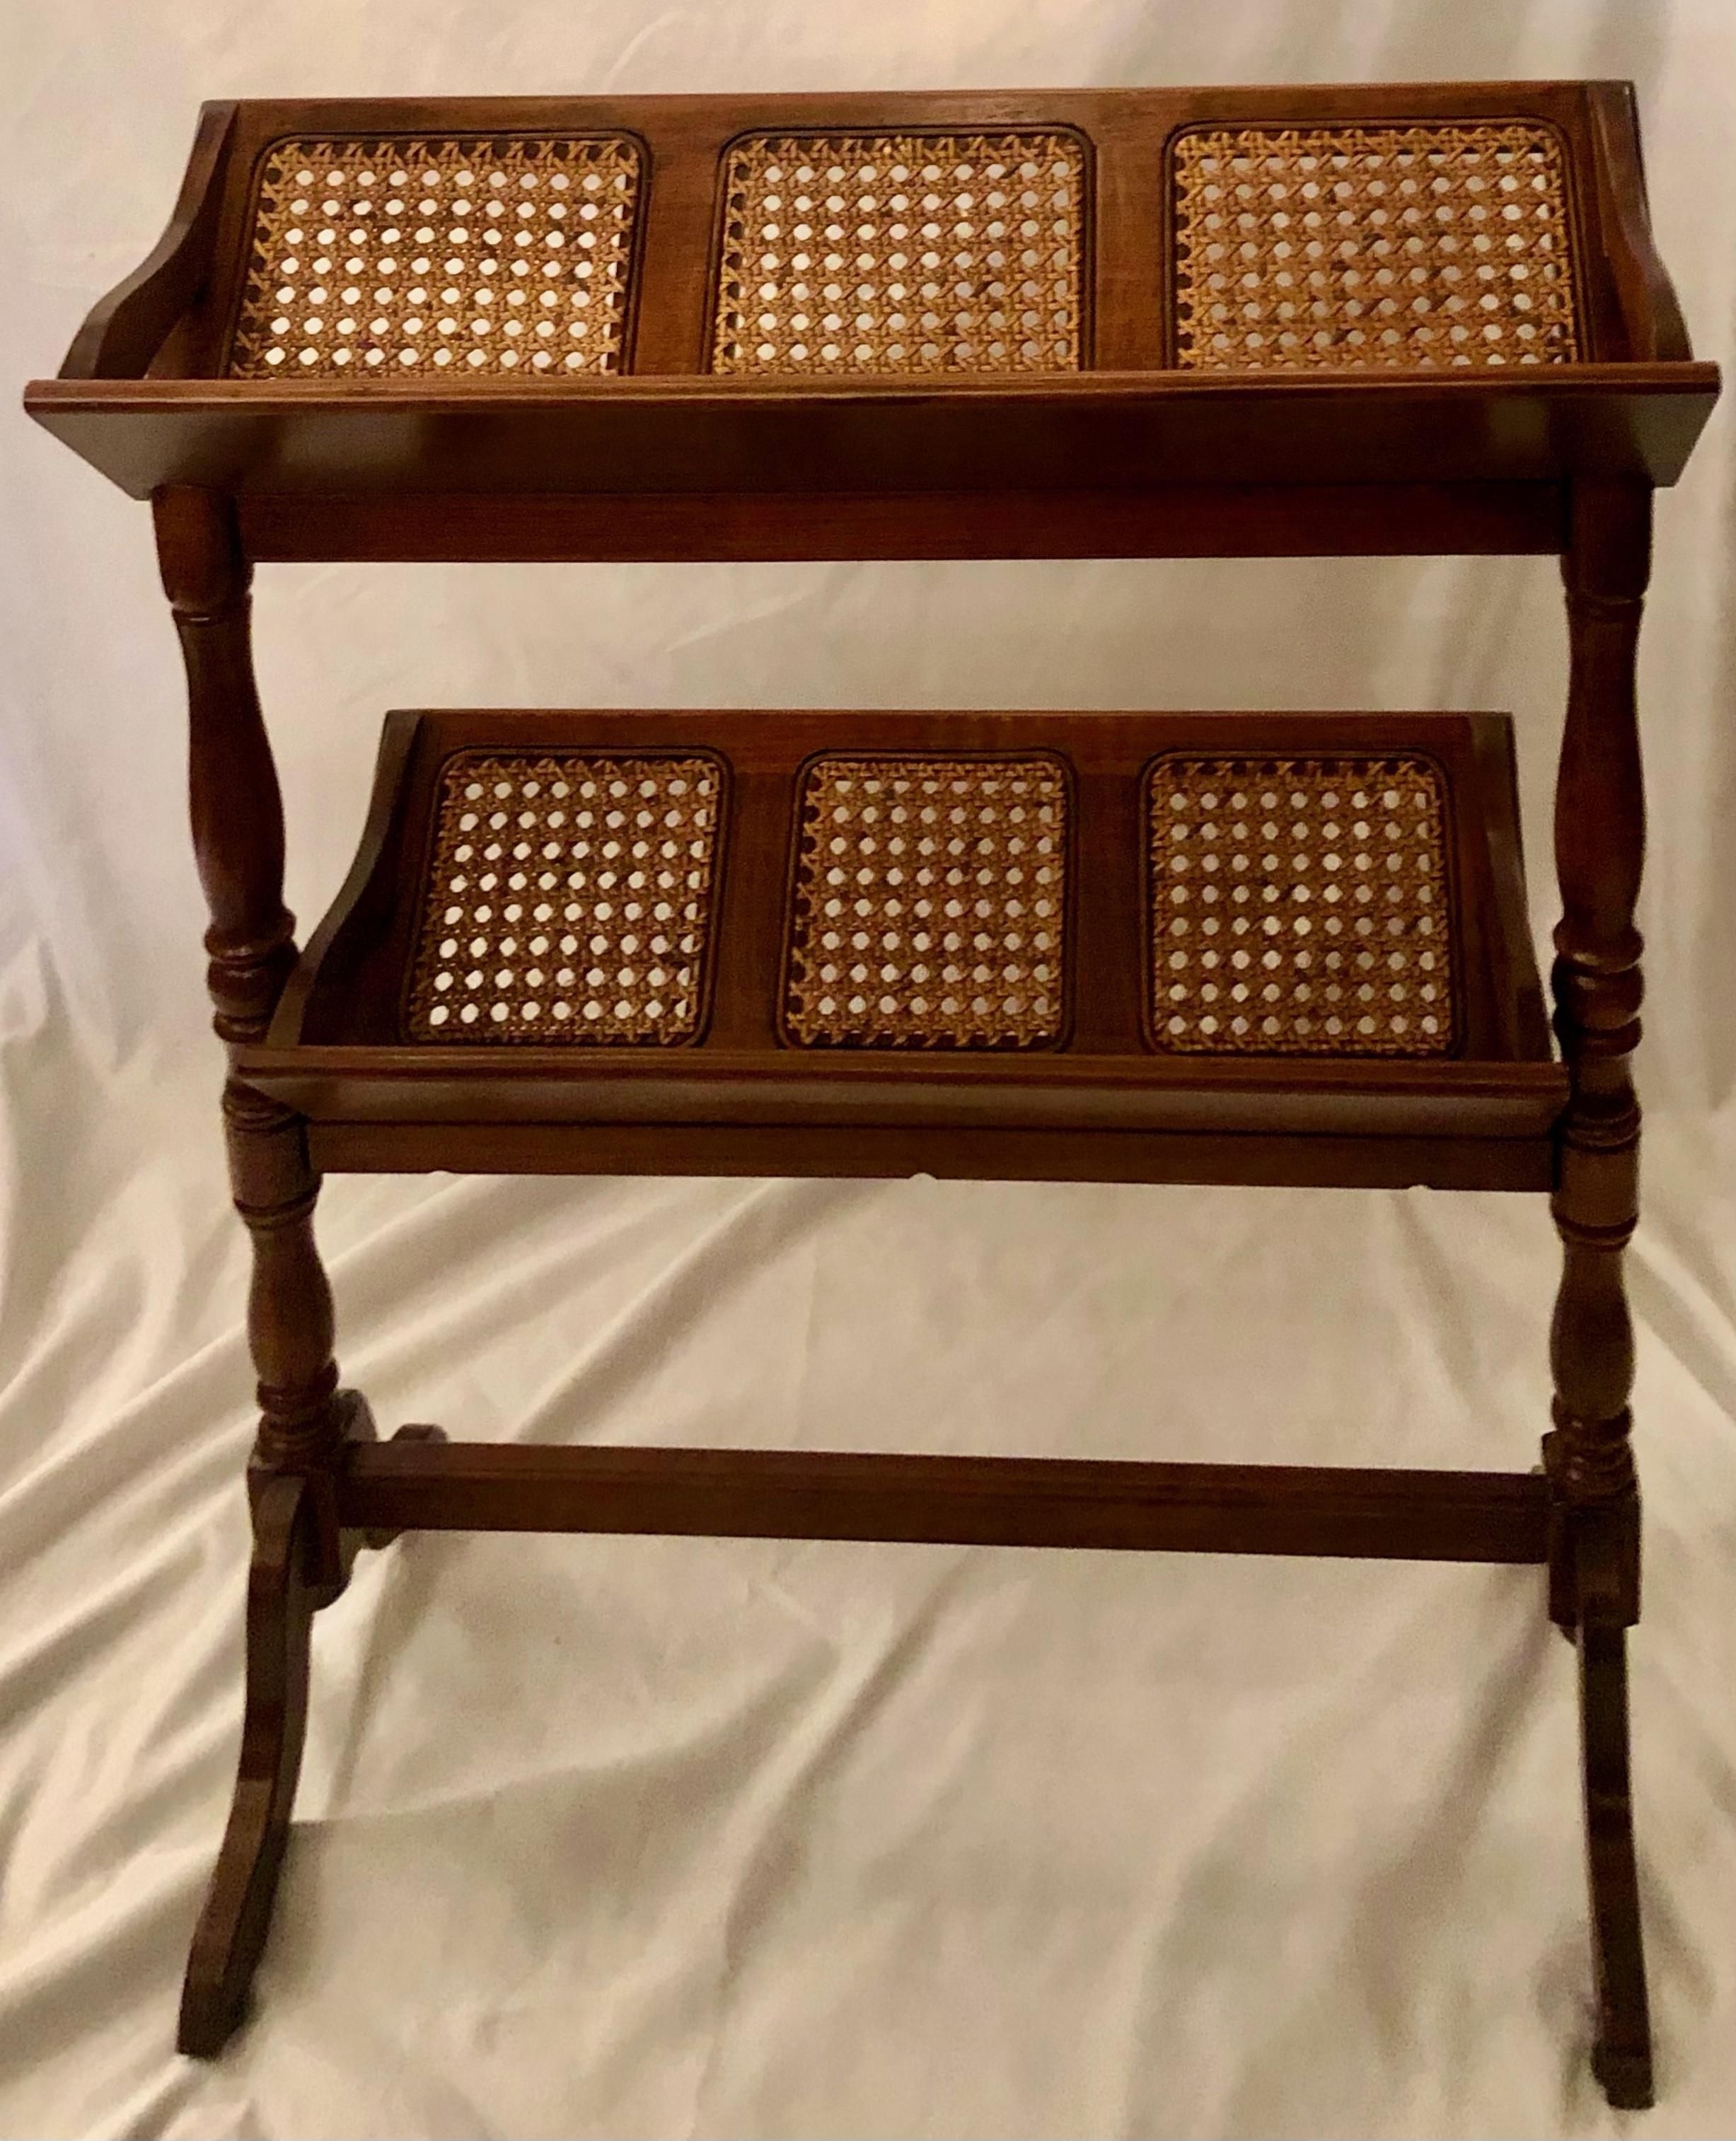 Handmade English fruitwood 2 tier book trough/stand with cane-inserts.